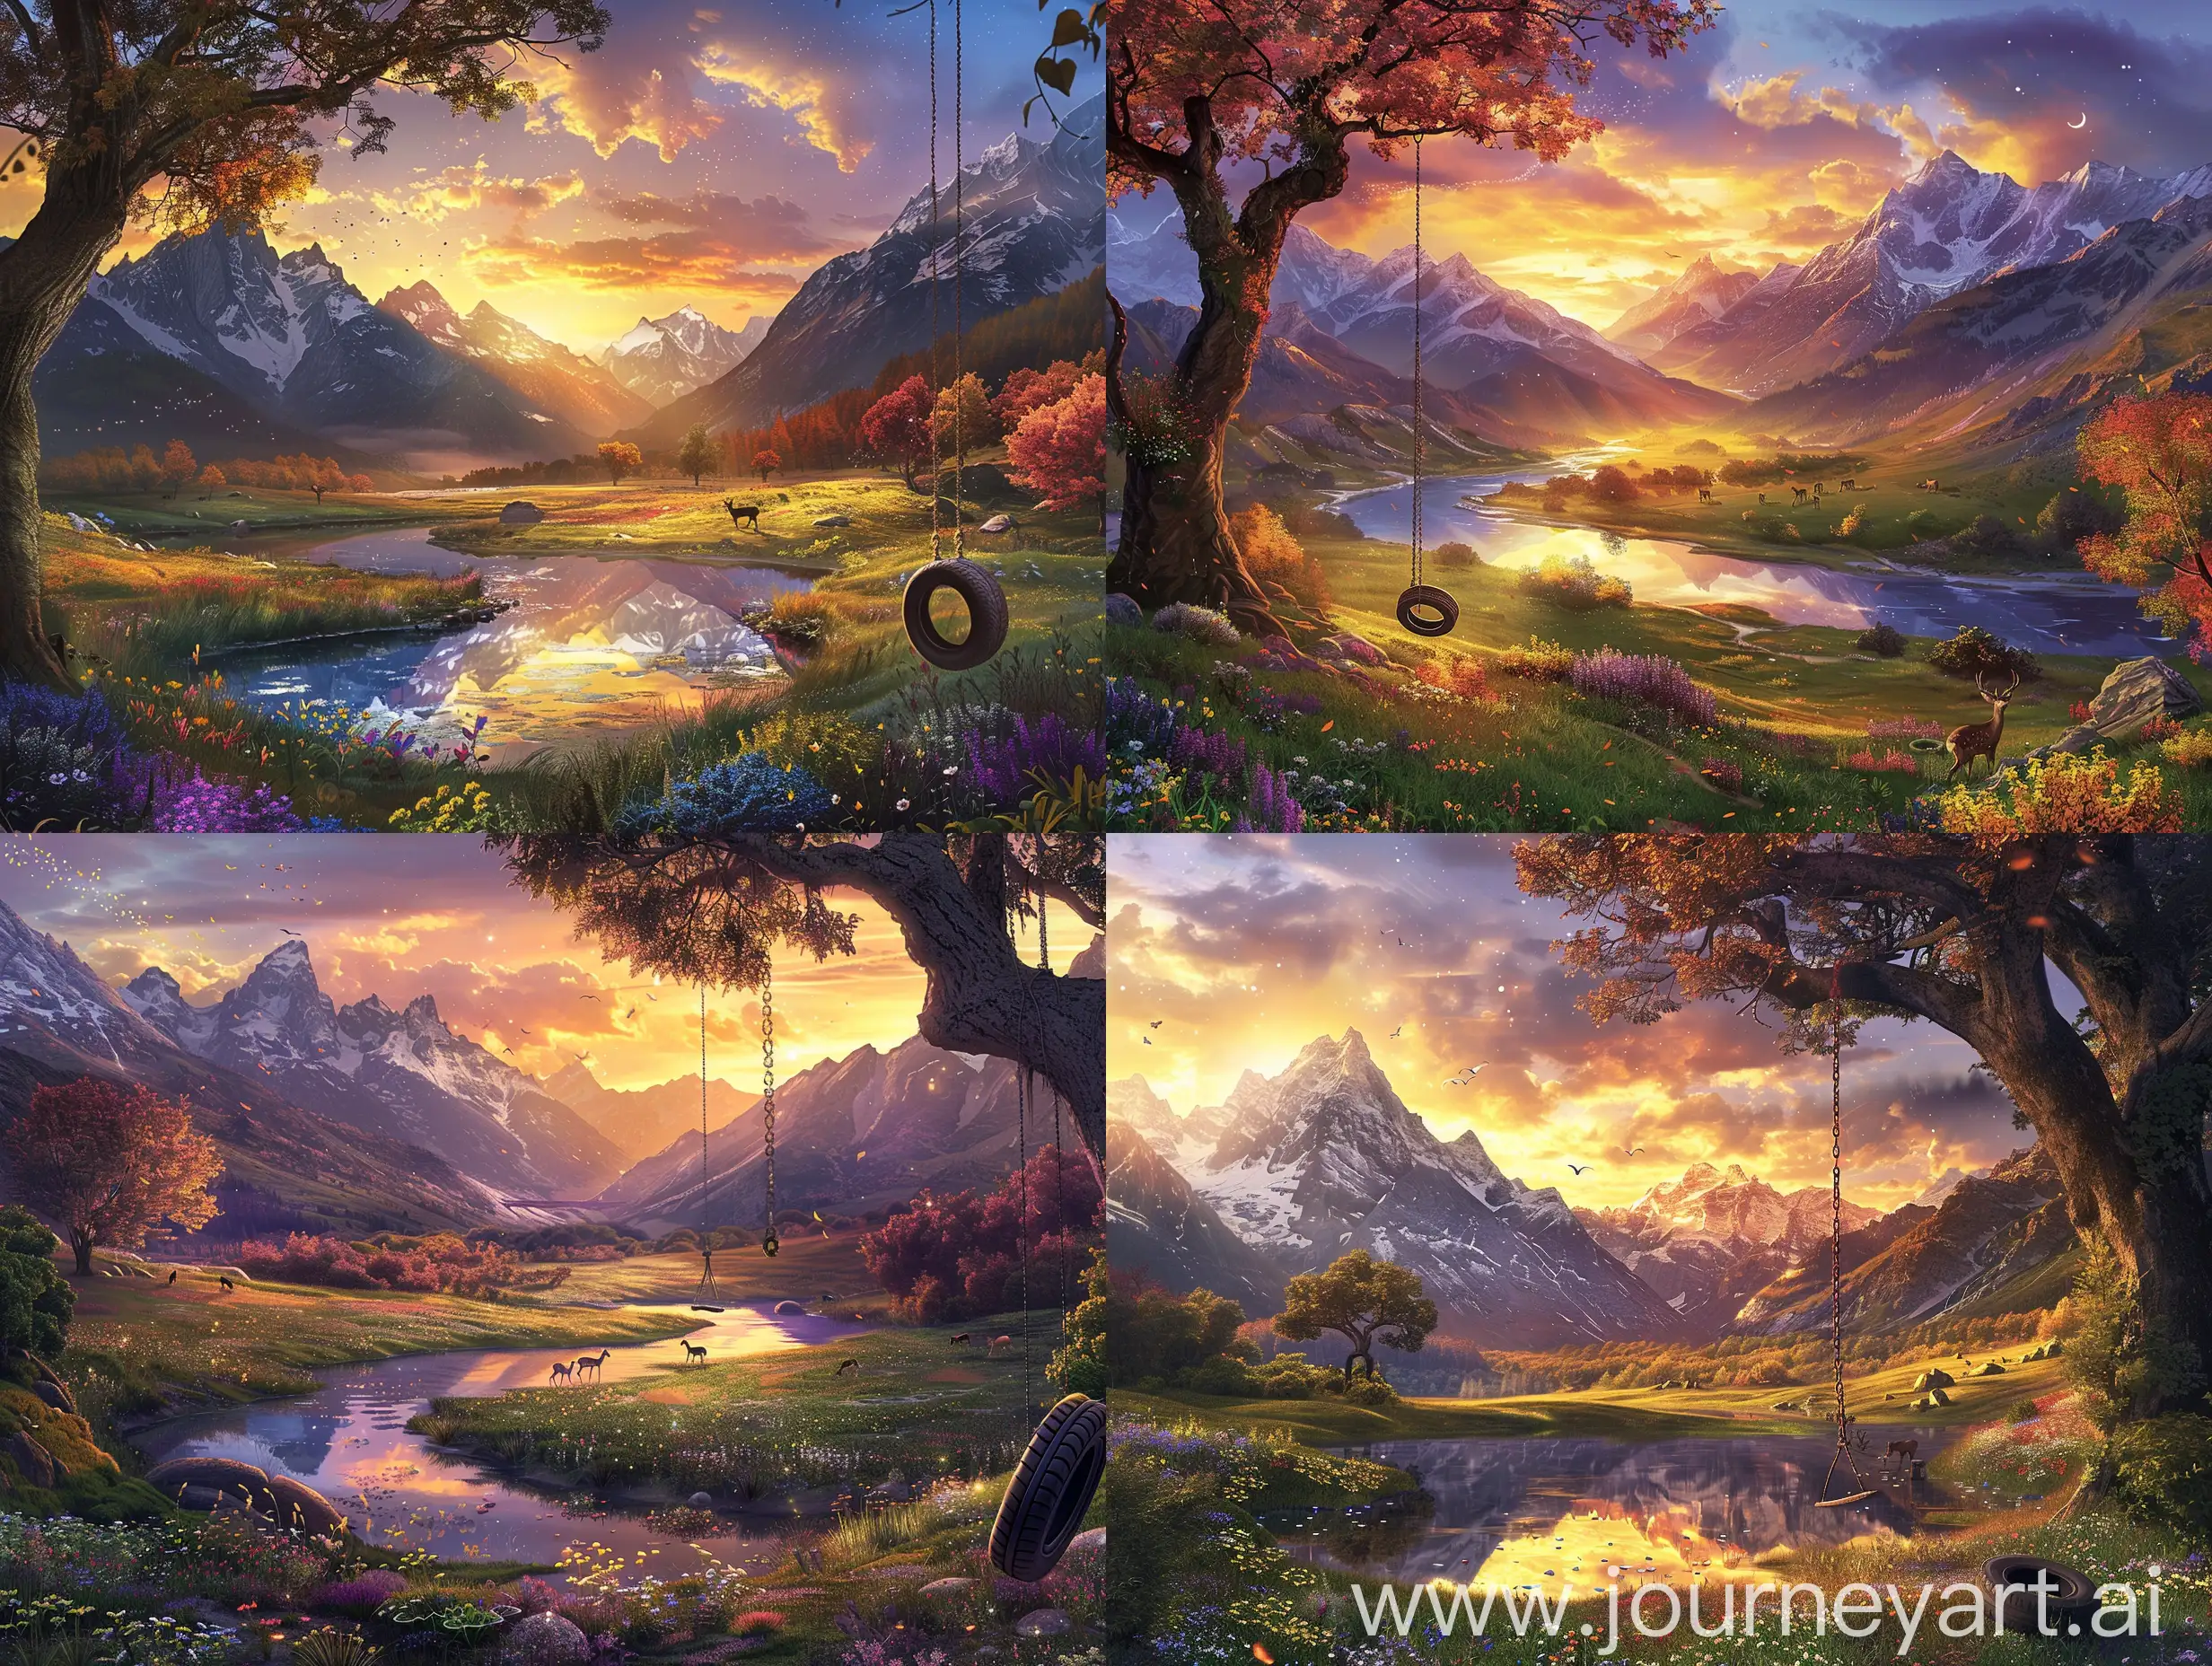 A tranquil landscape at the golden hour. The scene is set in a sprawling valley bordered by majestic mountains with snowy peaks, reflecting the hues of the setting sun. A gentle, crystal-clear river meanders through the center, capturing the last rays of the day and reflecting them back up into the sky, creating a stunning mirror effect. Lush, verdant meadows carpet the valley floor, dotted with wildflowers in a riot of colors - purples, yellows, and reds. A few deer can be seen grazing peacefully in the distance. Overhead, the sky is a watercolor painting of warm oranges, cool purples, and soft pinks, with a sprinkle of early stars peeking through. A lone, ancient oak tree stands in the foreground, its leaves aglow with the fiery colors of autumn, and a tire swing hanging from a sturdy branch, gently swaying in the breeze, adding a touch of nostalgia to the scene. The entire landscape exudes a sense of serene beauty, tranquility, and the magic of nature.